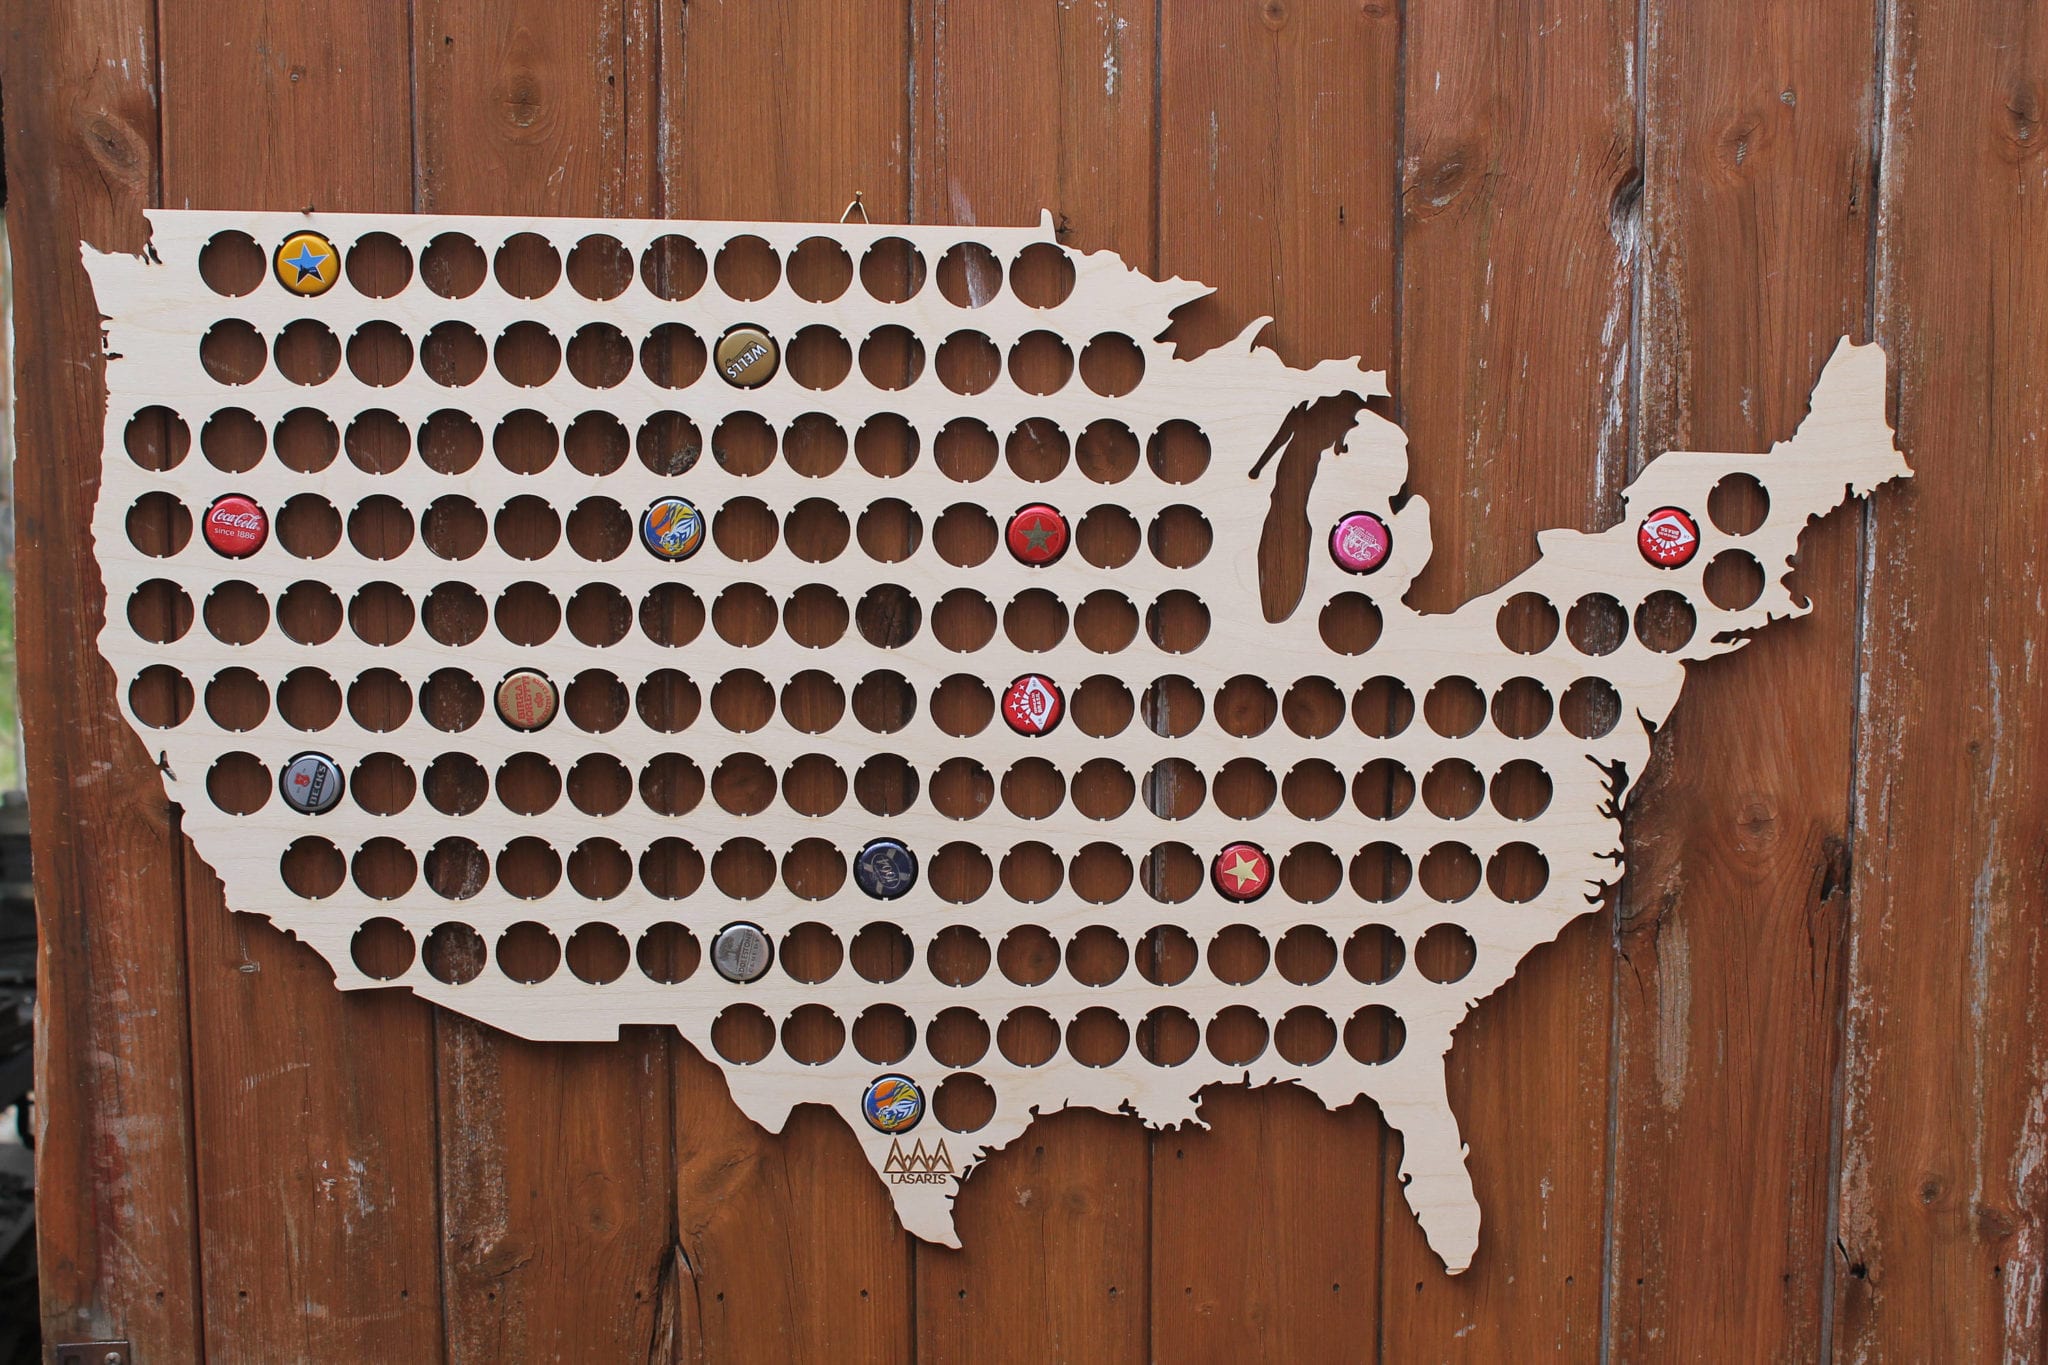 Giant USA Beer Cap Map Large Bottle Cap Holder Collection ...